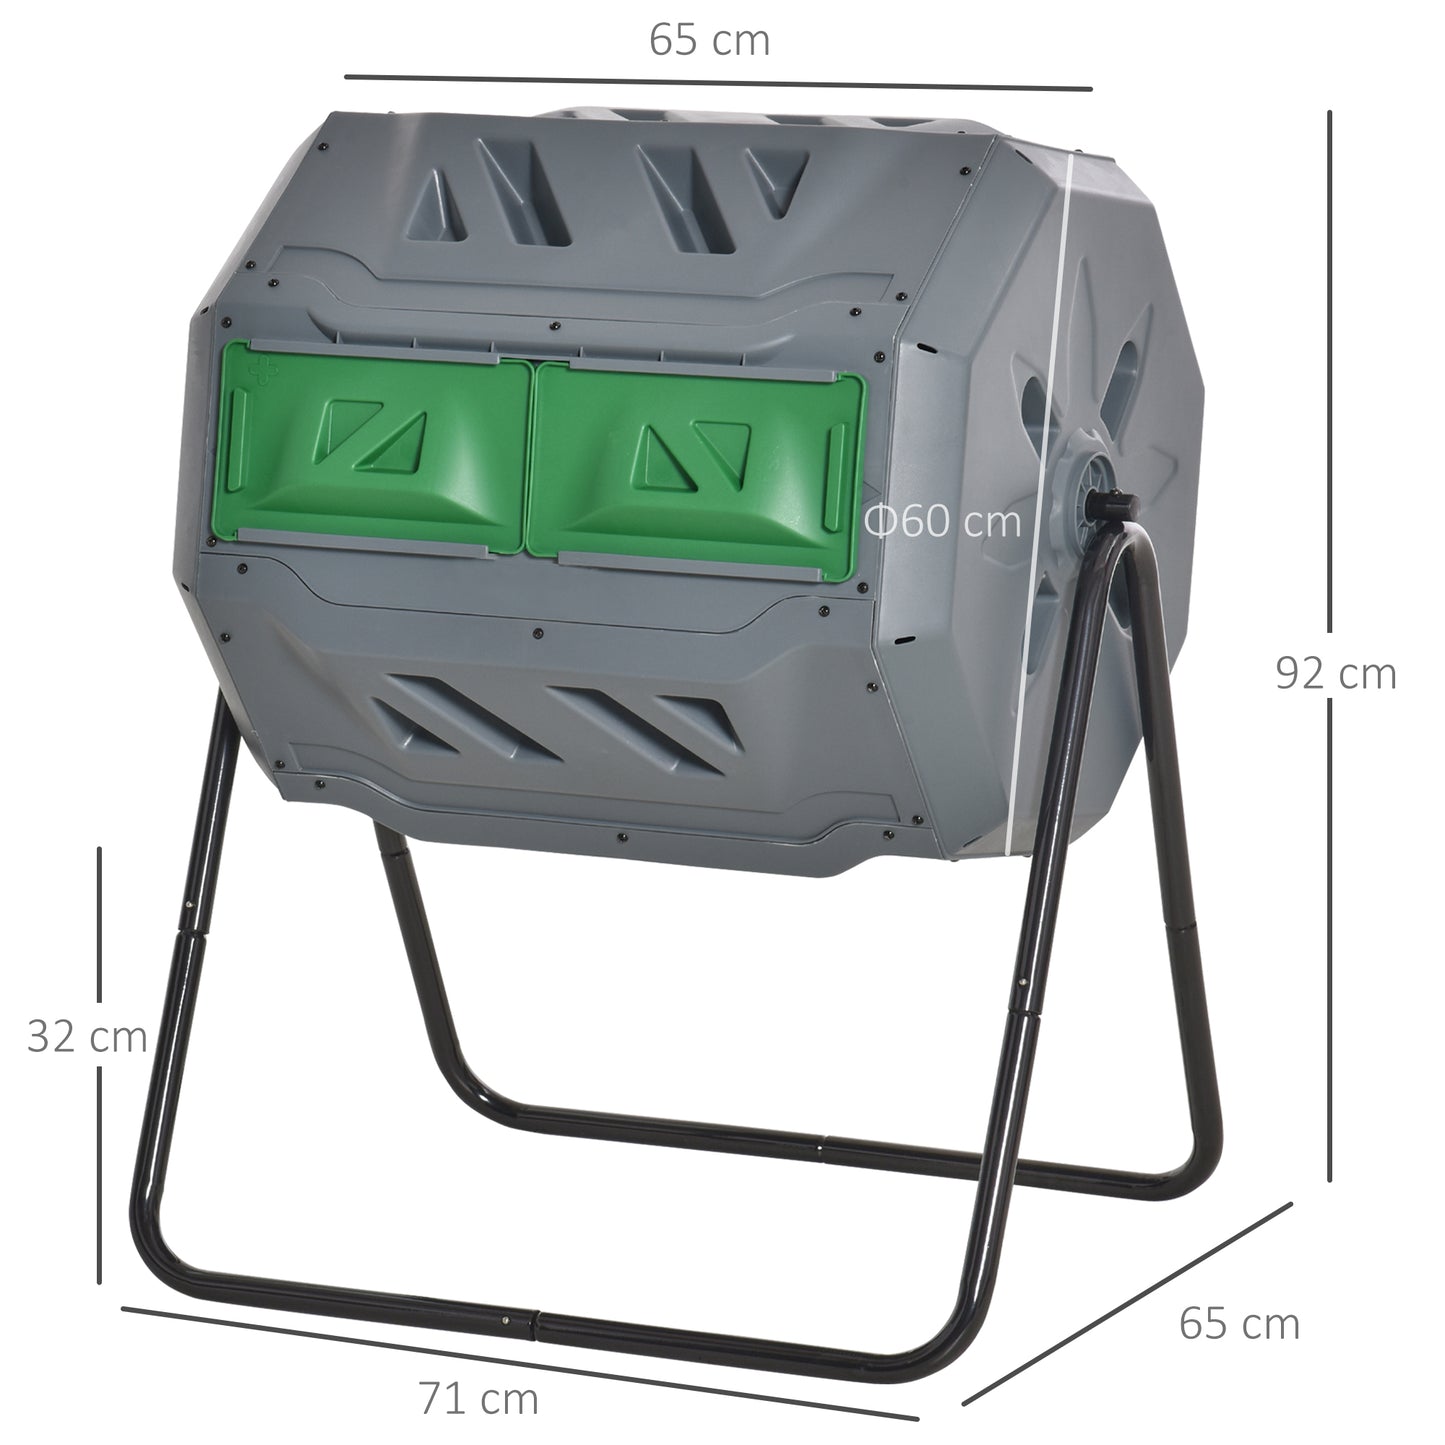 Outsunny 160L Tumbling Compost Bin Outdoor Dual Chamber 360° Rotating Composter, Garden Compost Bin w/ Sliding Doors & Solid Steel Frame, Grey